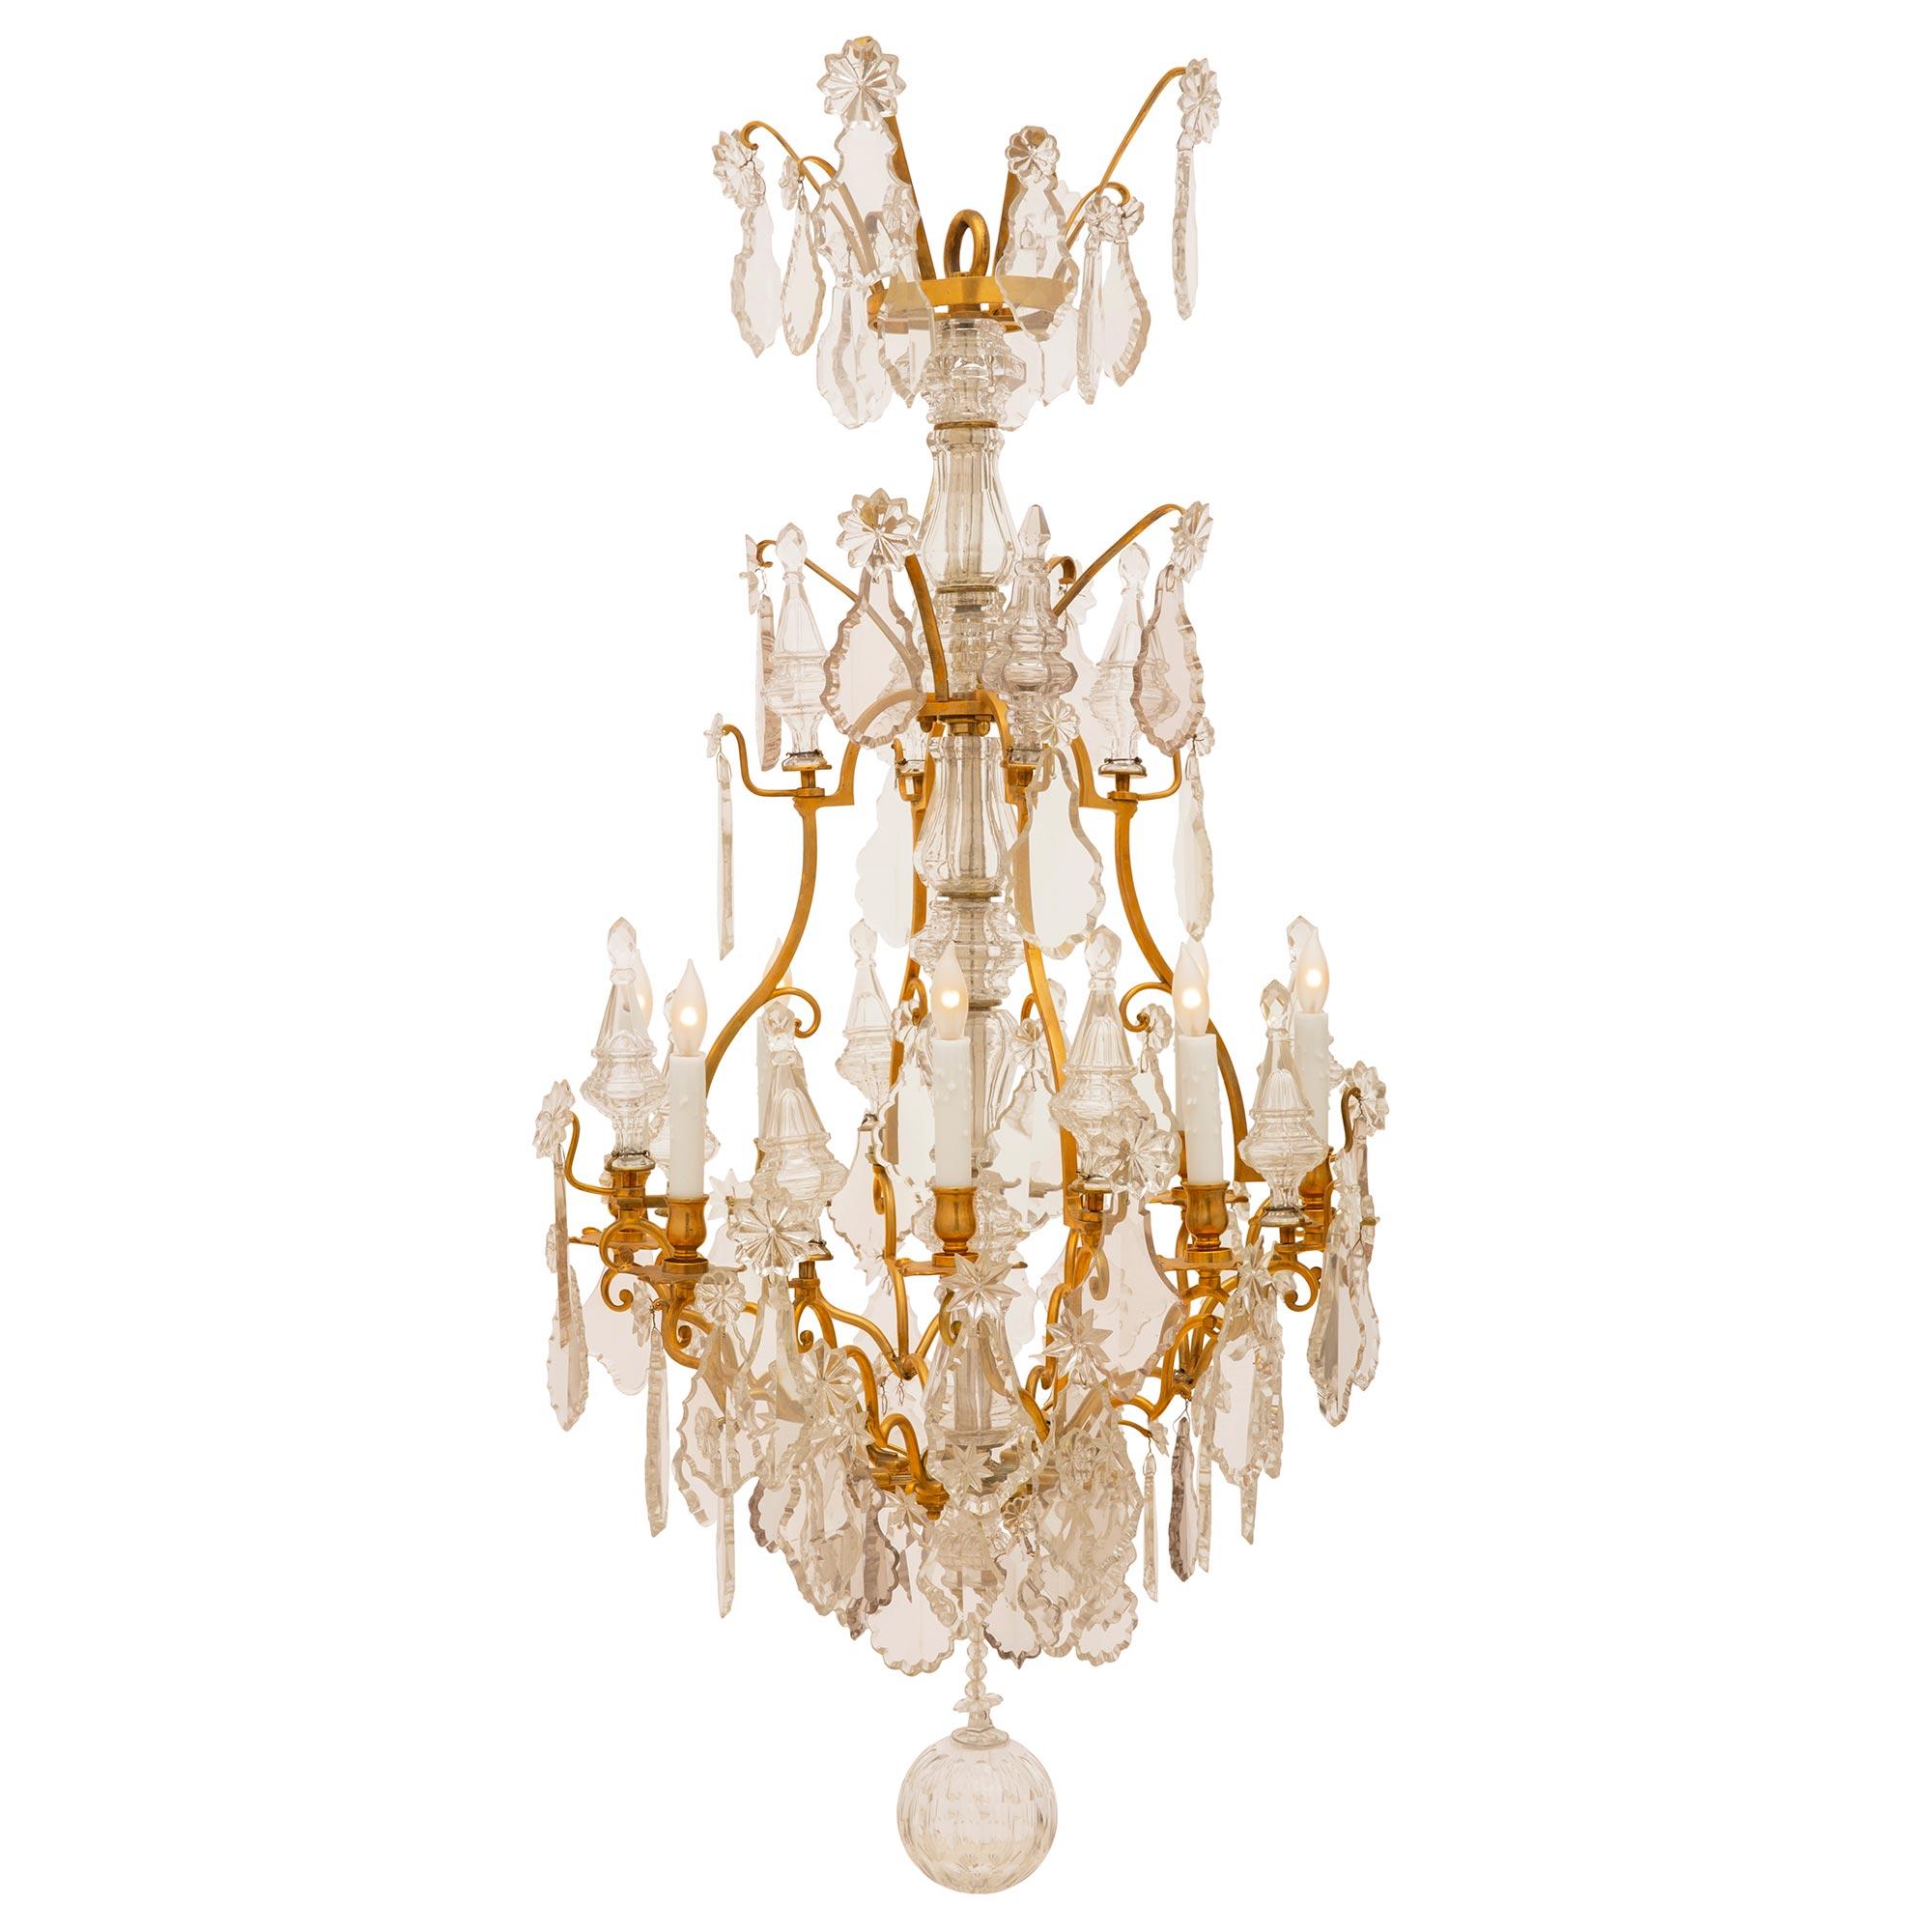 A stunning and important French early 19th century Louis XV st. Baccarat crystal and ormolu eight light chandelier. The incredible Baccarat central fut is surrounded by scrolled ormolu arms decorated by two rows of daggers, amidst different size and